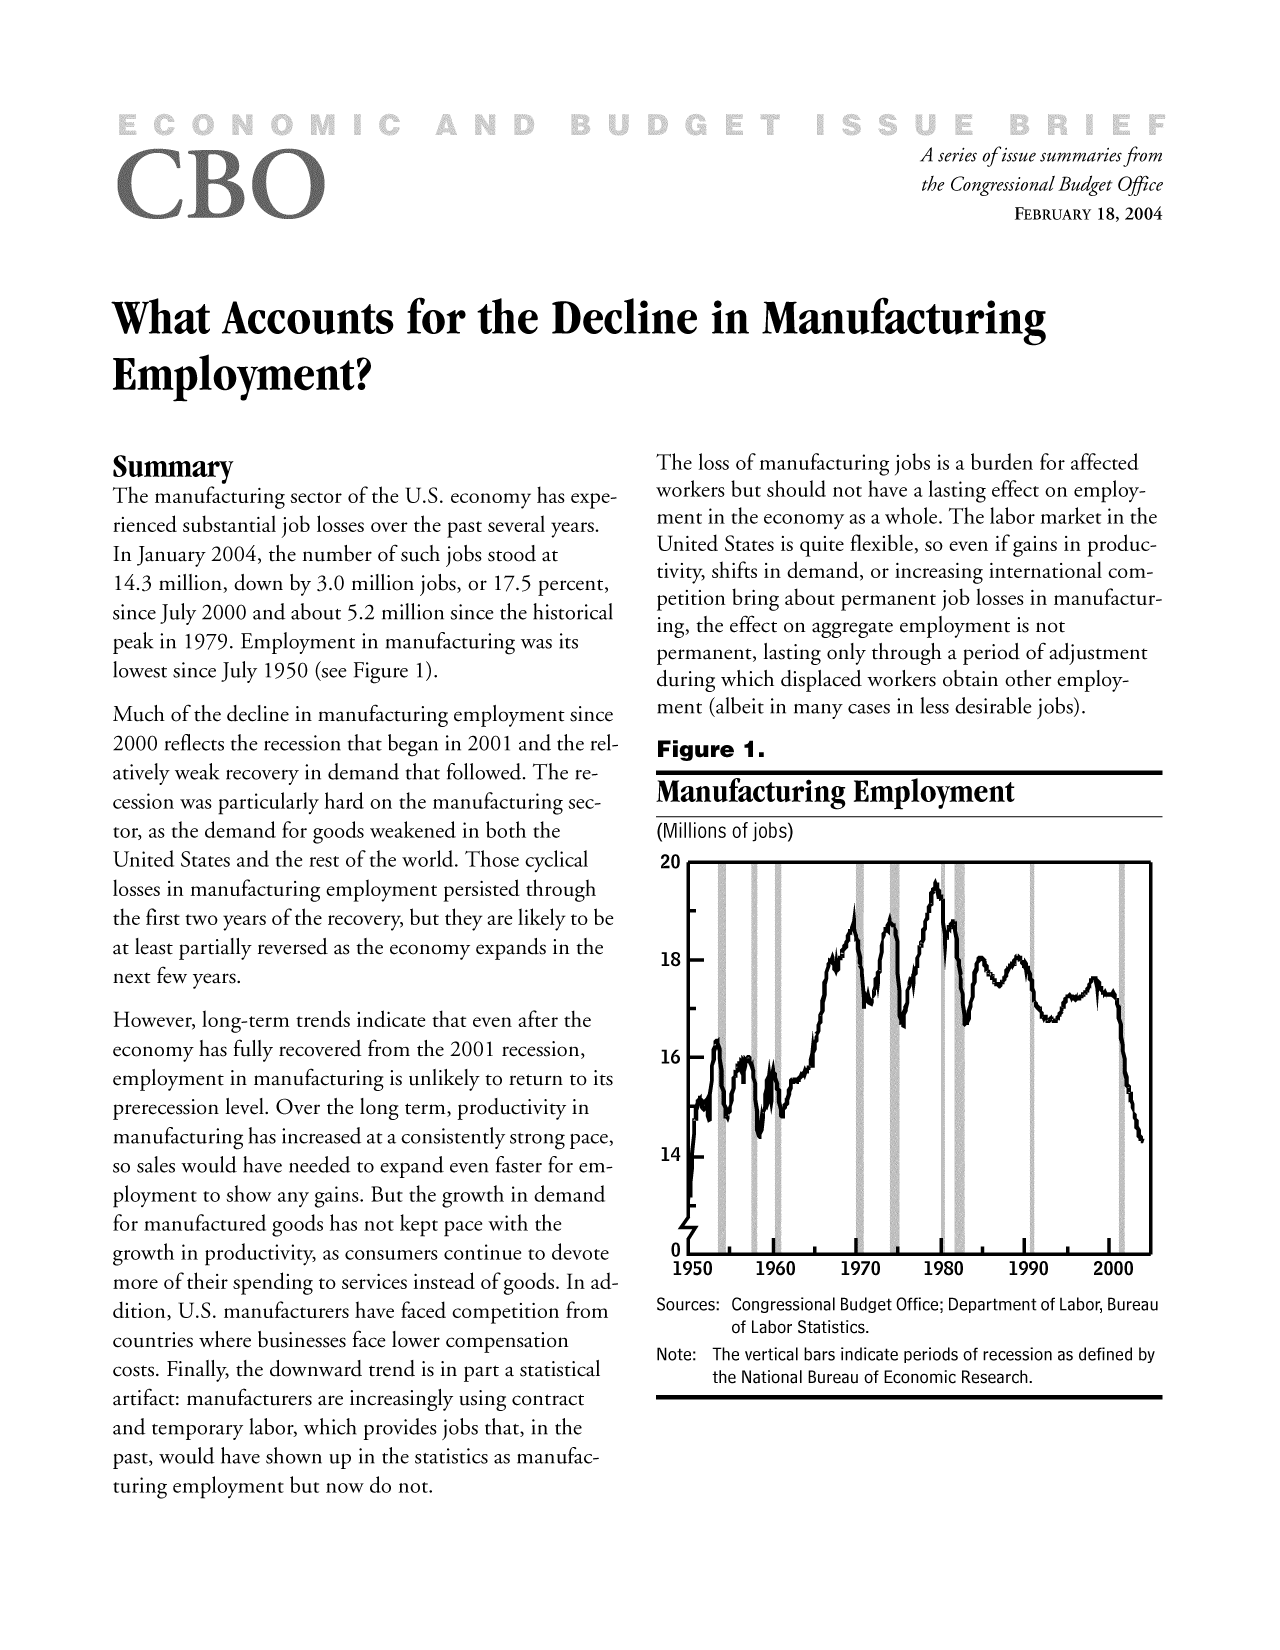 handle is hein.congrec/cbo9519 and id is 1 raw text is: A series of issue summaries from
the Congressional Budget Office
FEBRUARY 18, 2004
What Accounts for the Decline in Manufacturing
Employment?

Summary
The manufacturing sector of the U.S. economy has expe-
rienced substantial job losses over the past several years.
In January 2004, the number of such jobs stood at
14.3 million, down by 3.0 million jobs, or 17.5 percent,
since July 2000 and about 5.2 million since the historical
peak in 1979. Employment in manufacturing was its
lowest since July 1950 (see Figure 1).
Much of the decline in manufacturing employment since
2000 reflects the recession that began in 2001 and the rel-
atively weak recovery in demand that followed. The re-
cession was particularly hard on the manufacturing sec-
tor, as the demand for goods weakened in both the
United States and the rest of the world. Those cyclical
losses in manufacturing employment persisted through
the first two years of the recovery, but they are likely to be
at least partially reversed as the economy expands in the
next few years.
However, long-term trends indicate that even after the
economy has fully recovered from the 2001 recession,
employment in manufacturing is unlikely to return to its
prerecession level. Over the long term, productivity in
manufacturing has increased at a consistently strong pace,
so sales would have needed to expand even faster for em-
ployment to show any gains. But the growth in demand
for manufactured goods has not kept pace with the
growth in productivity, as consumers continue to devote
more of their spending to services instead of goods. In ad-
dition, U.S. manufacturers have faced competition from
countries where businesses face lower compensation
costs. Finally, the downward trend is in part a statistical
artifact: manufacturers are increasingly using contract
and temporary labor, which provides jobs that, in the
past, would have shown up in the statistics as manufac-
turing employment but now do not.

The loss of manufacturing jobs is a burden for affected
workers but should not have a lasting effect on employ-
ment in the economy as a whole. The labor market in the
United States is quite flexible, so even if gains in produc-
tivity, shifts in demand, or increasing international com-
petition bring about permanent job losses in manufactur-
ing, the effect on aggregate employment is not
permanent, lasting only through a period of adjustment
during which displaced workers obtain other employ-
ment (albeit in many cases in less desirable jobs).
Figure 1.
Manufacturing Employment
(Millions of jobs)
20r

n I    .    I   .    I         I   .    1    .    I    I
1950      1960     1970      1980     1990      2000
Sources: Congressional Budget Office; Department of Labor, Bureau
of Labor Statistics.
Note: The vertical bars indicate periods of recession as defined by
the National Bureau of Economic Research.


